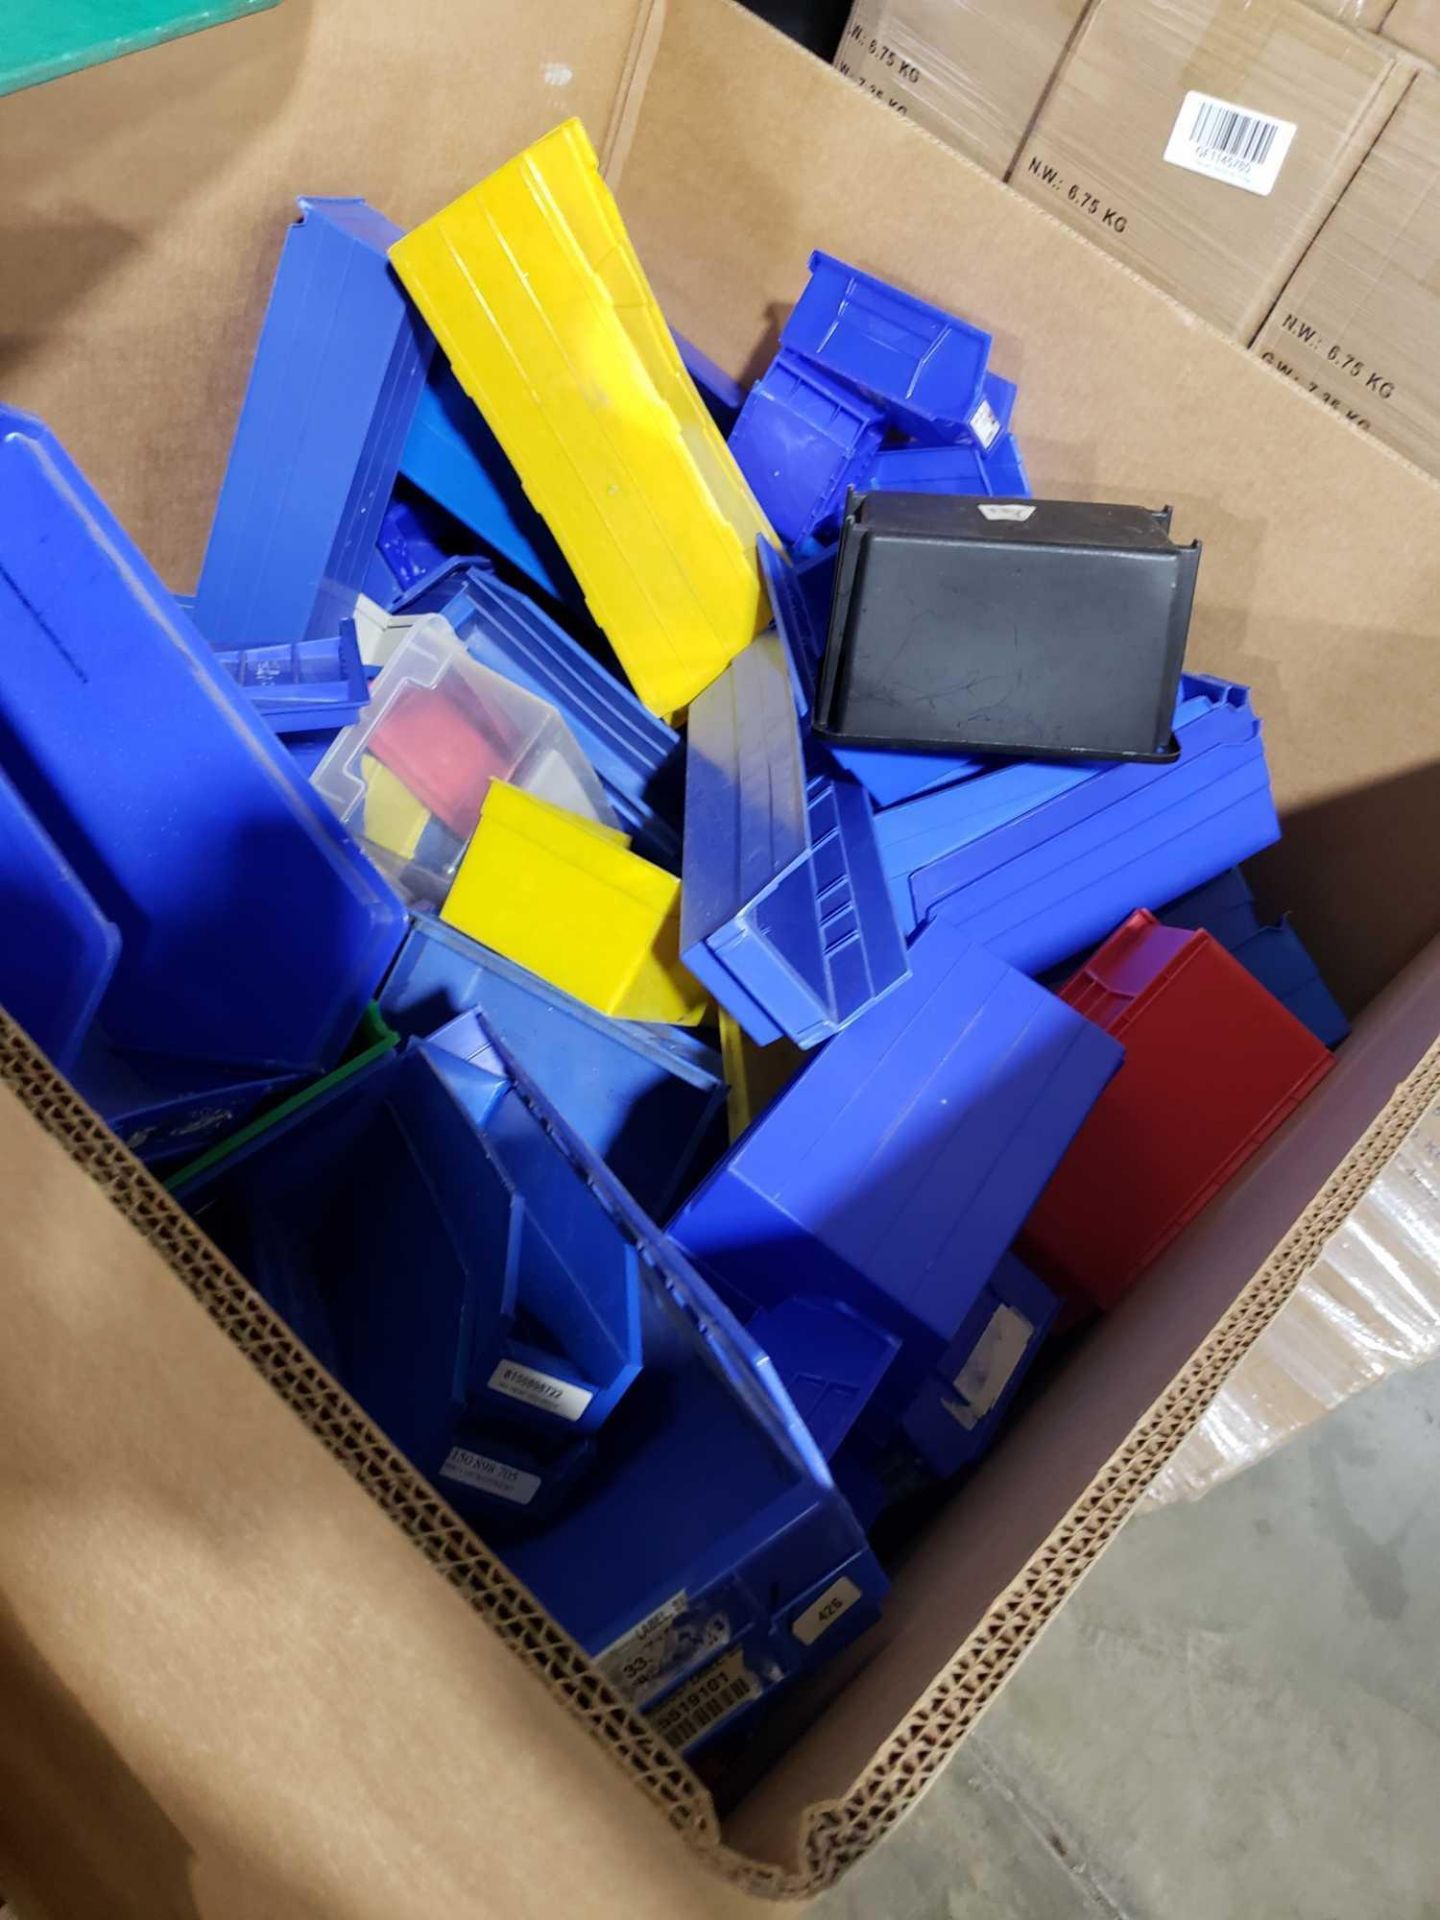 Contents of cardboard gaylord including large quantity of various size and color hanging bins. - Image 2 of 4